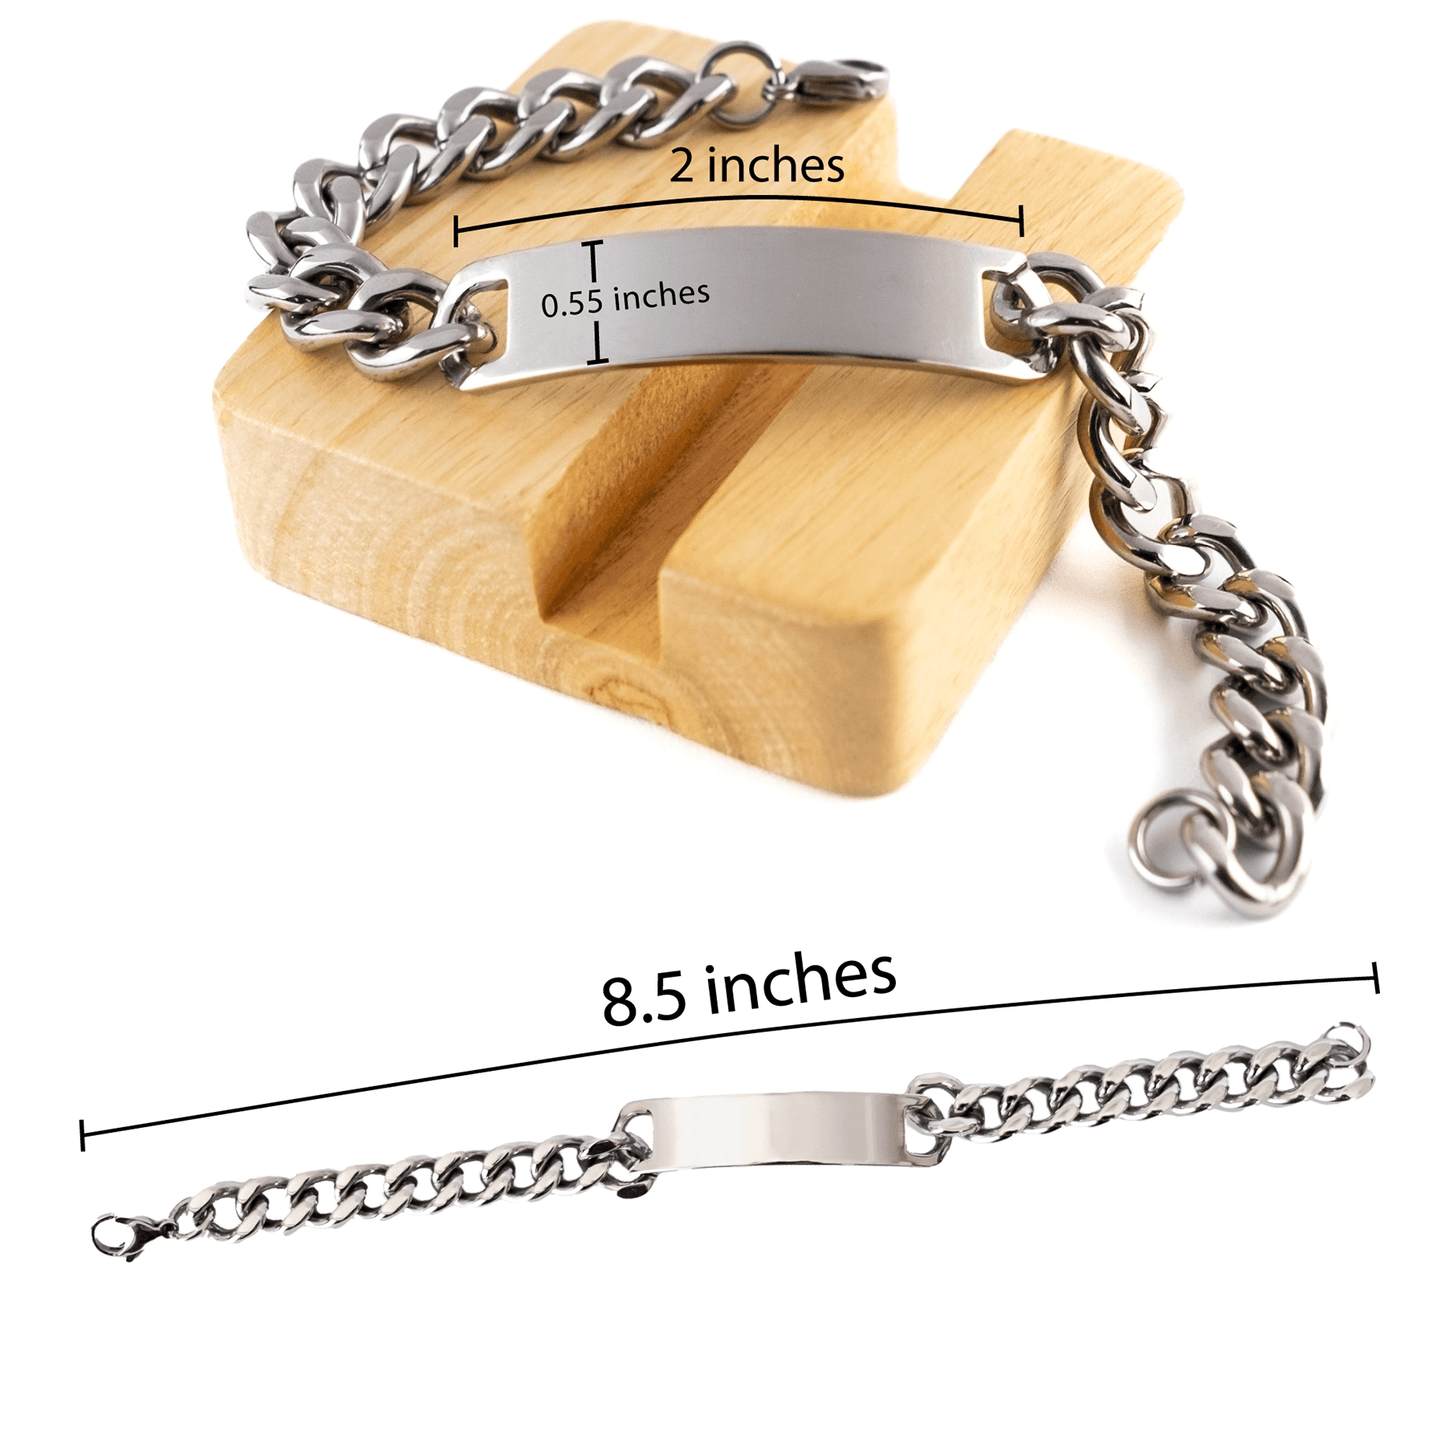 Remarkable Millwright Gifts, Your dedication and hard work, Inspirational Birthday Christmas Unique Cuban Chain Stainless Steel Bracelet For Millwright, Coworkers, Men, Women, Friends - Mallard Moon Gift Shop